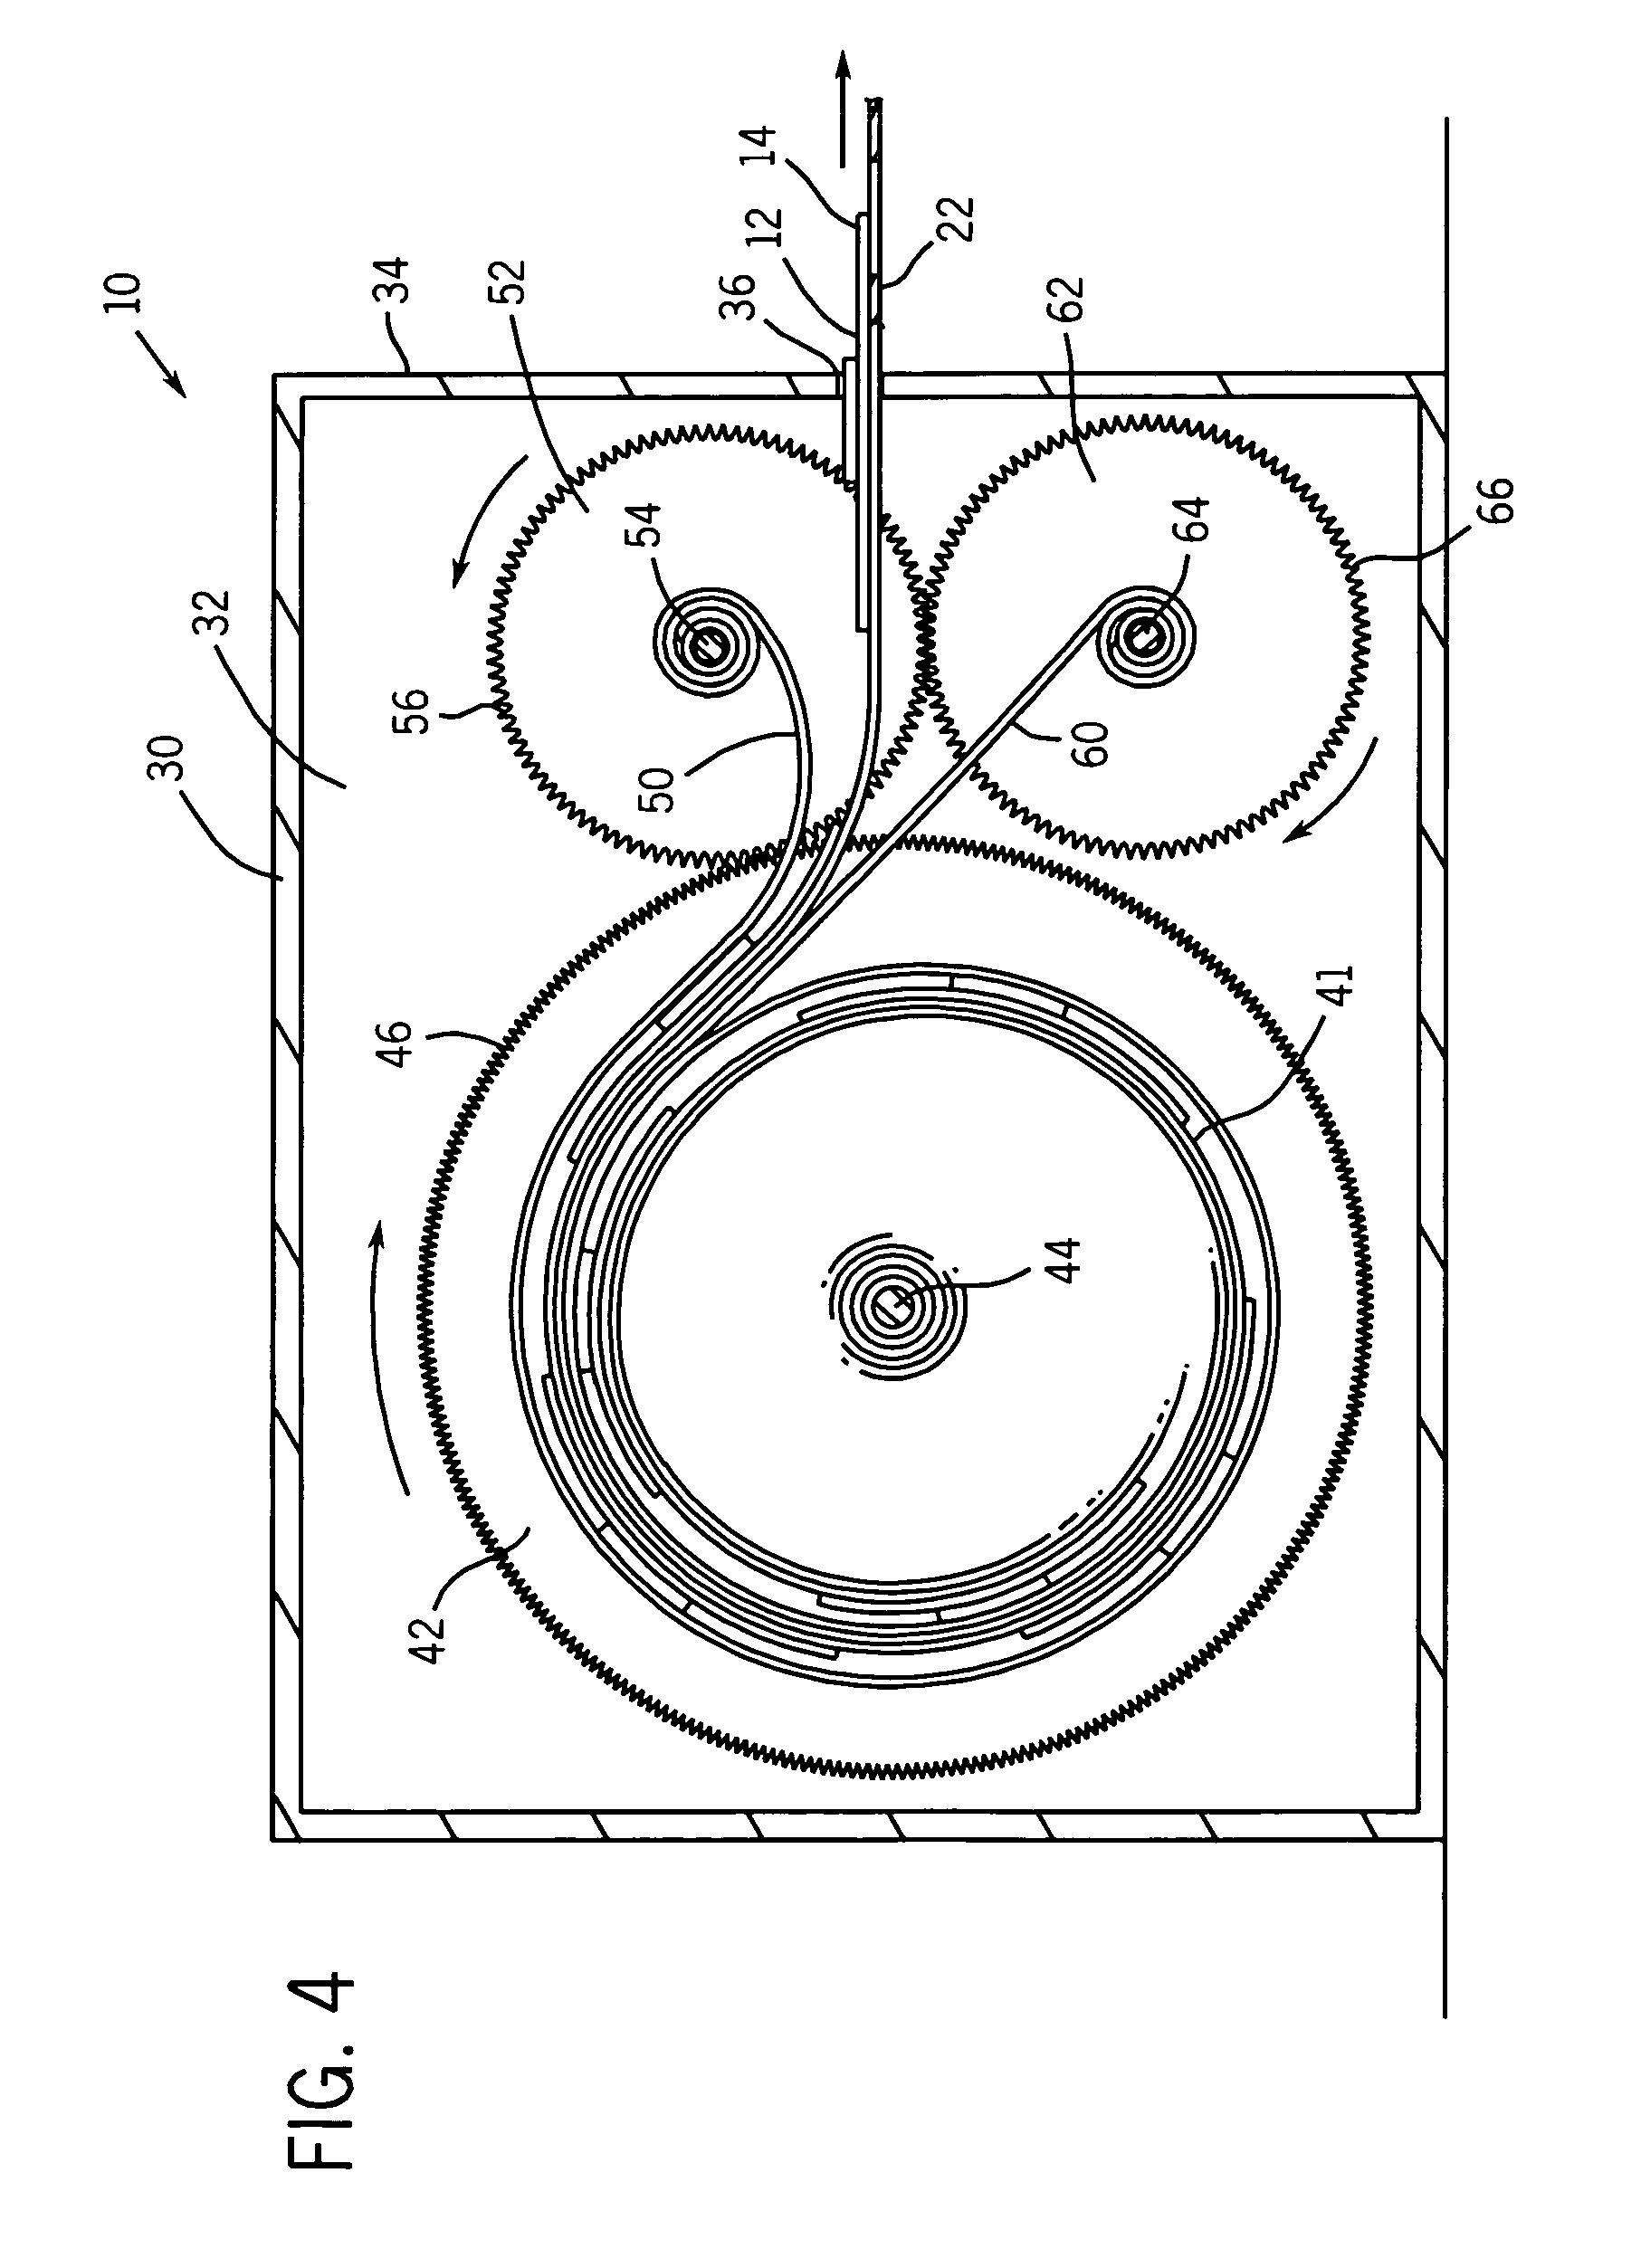 Adhesive bandage carrier and bandage dispensing assembly therefor